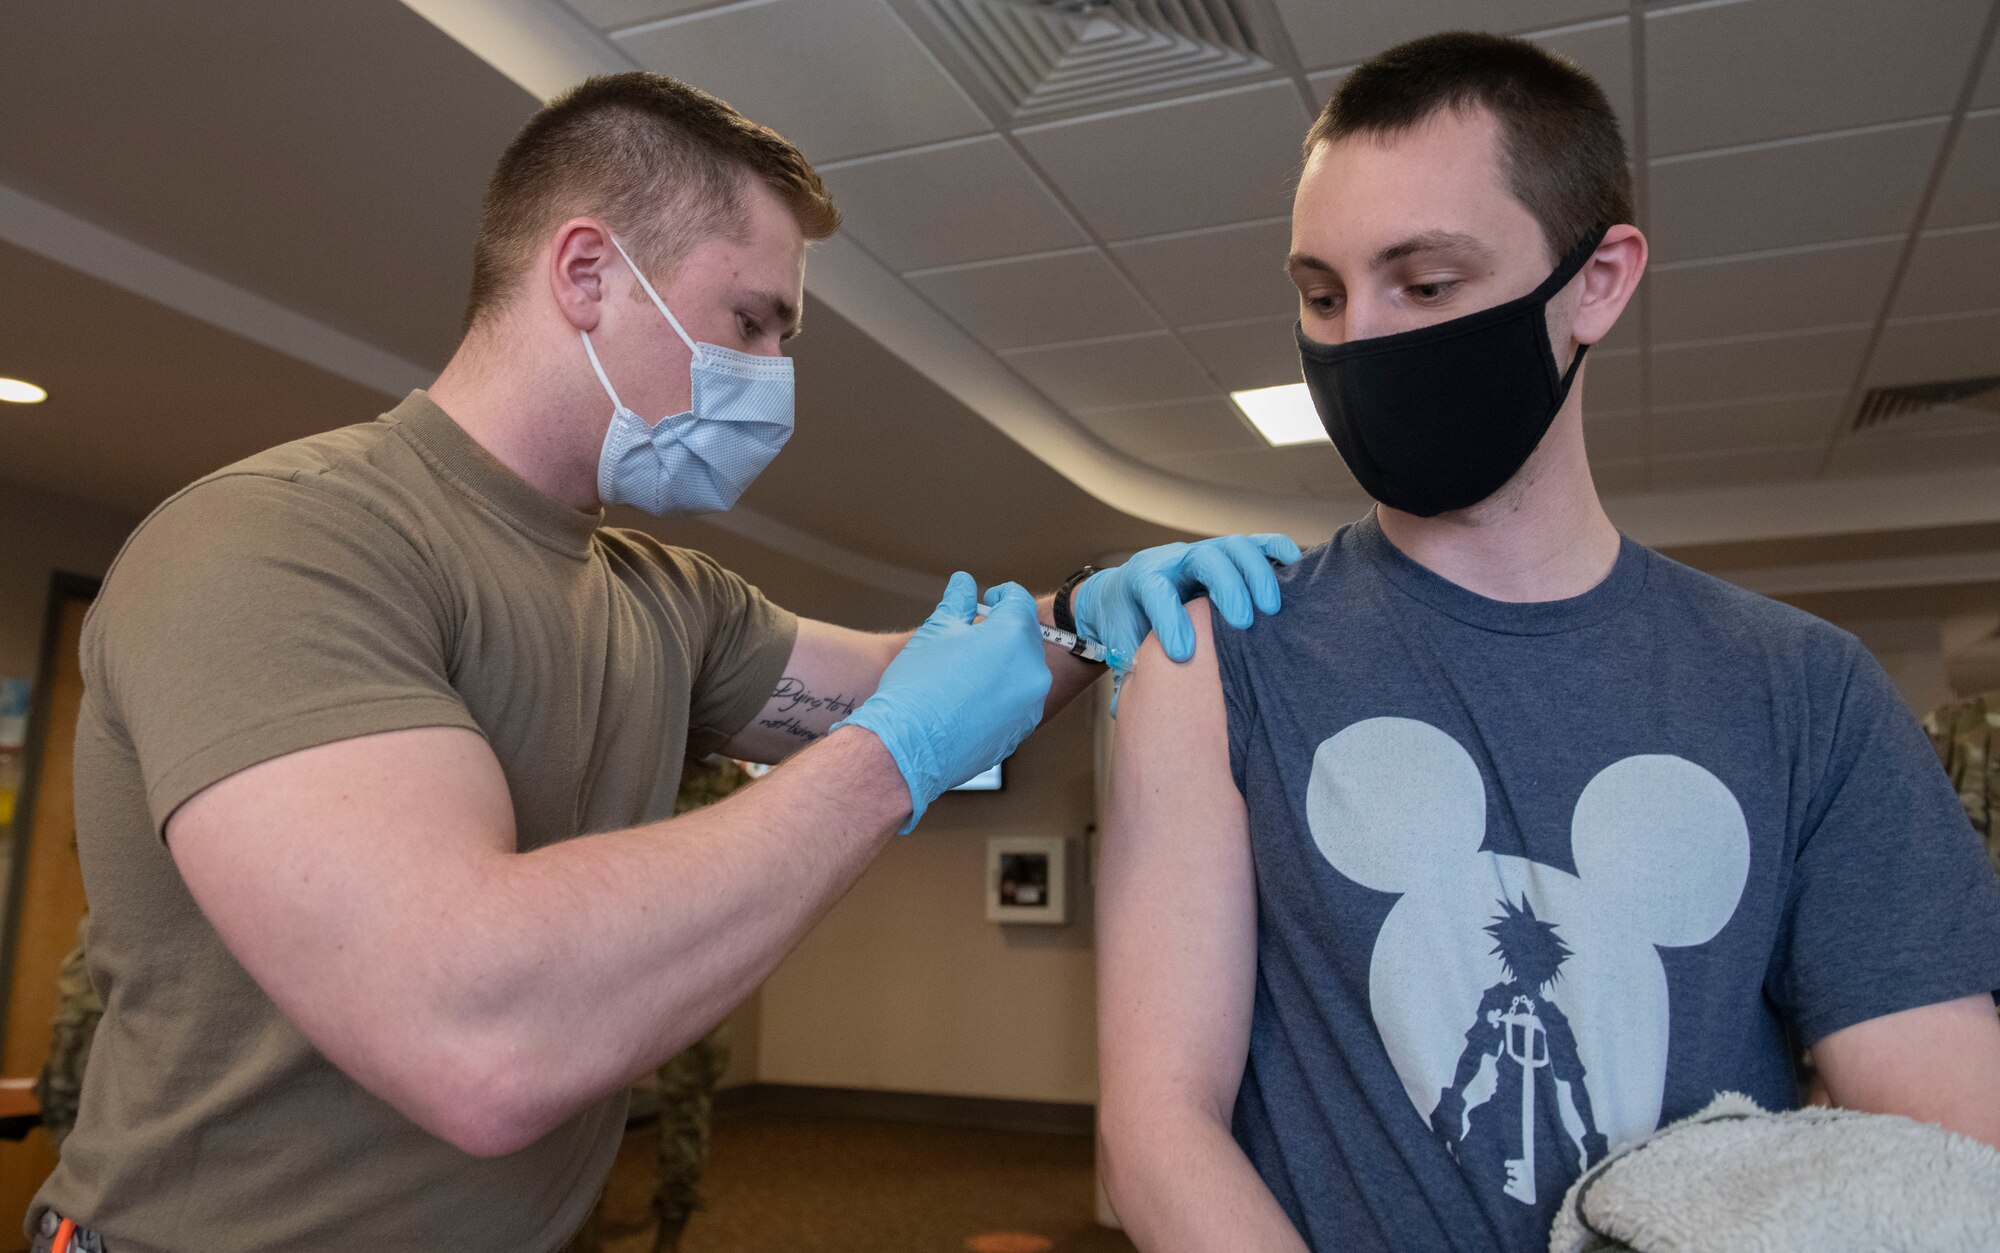 Airman 1st Class Brett Gundon, 319th Health Care Operations Squadron aerospace medical technician, administers a COVID-19 vaccine to Capt. Eric Chistolini, 348th Reconnaissance Squadron RQ-4 Global Hawk mission commander, at Grand Forks Air Force Base, N.D., Jan. 22, 2021. The 319th Reconnaissance Wing received their first shipment of vaccines on Jan. 21 and within 30 hours, all doses had been administered to base personnel.